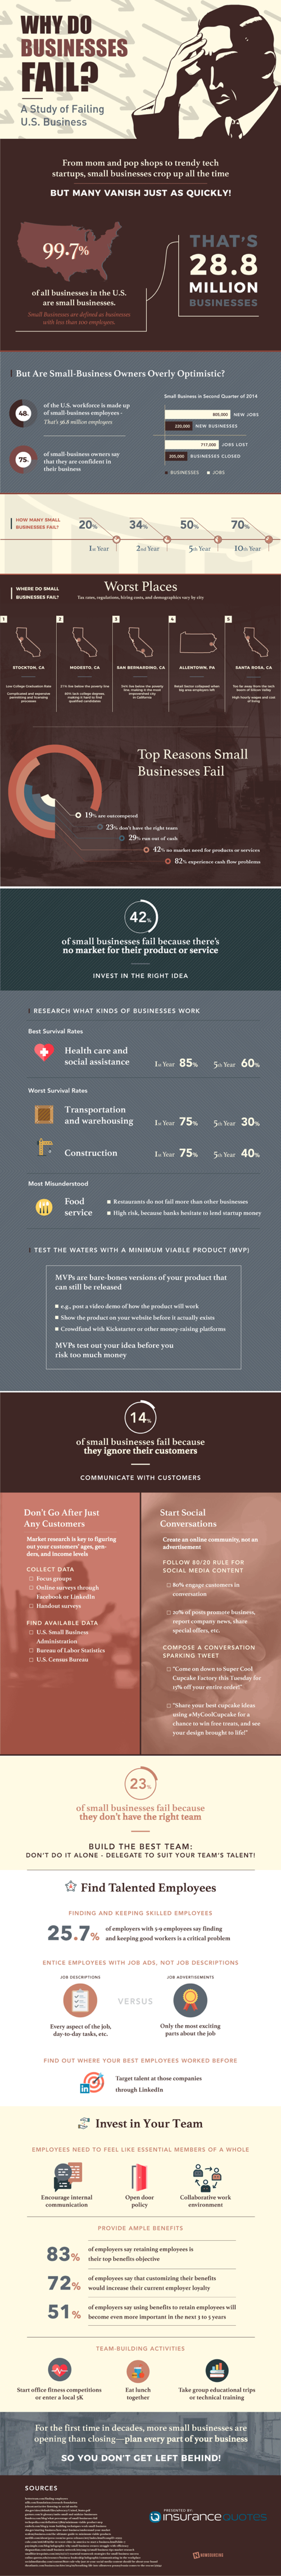 Why Do Businesses Fail? infographic